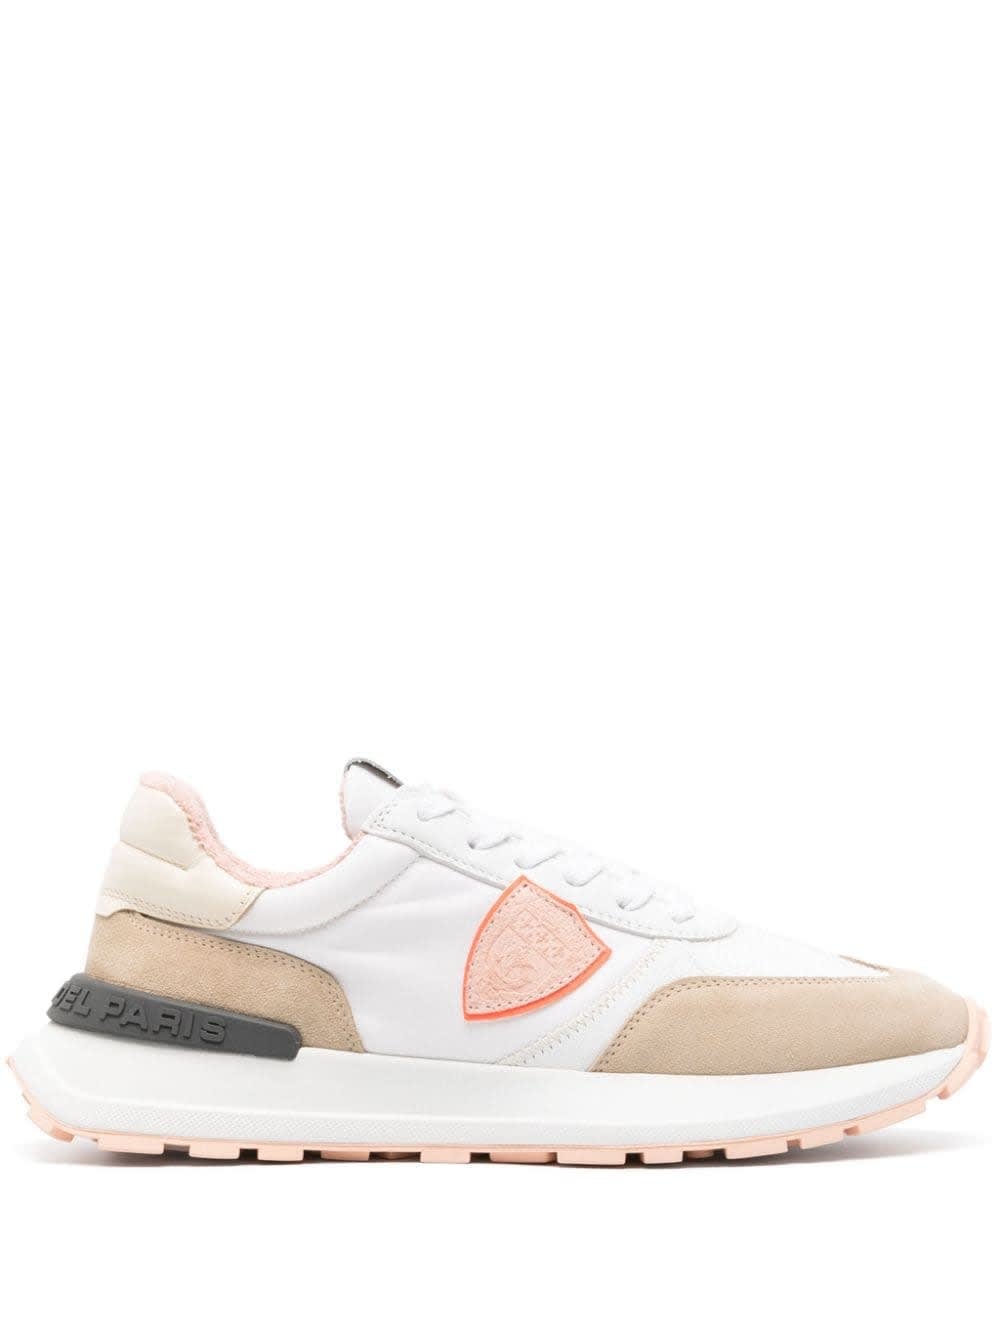 Philippe Model Running Antibes Sneakers - White And Pink In Multicolour